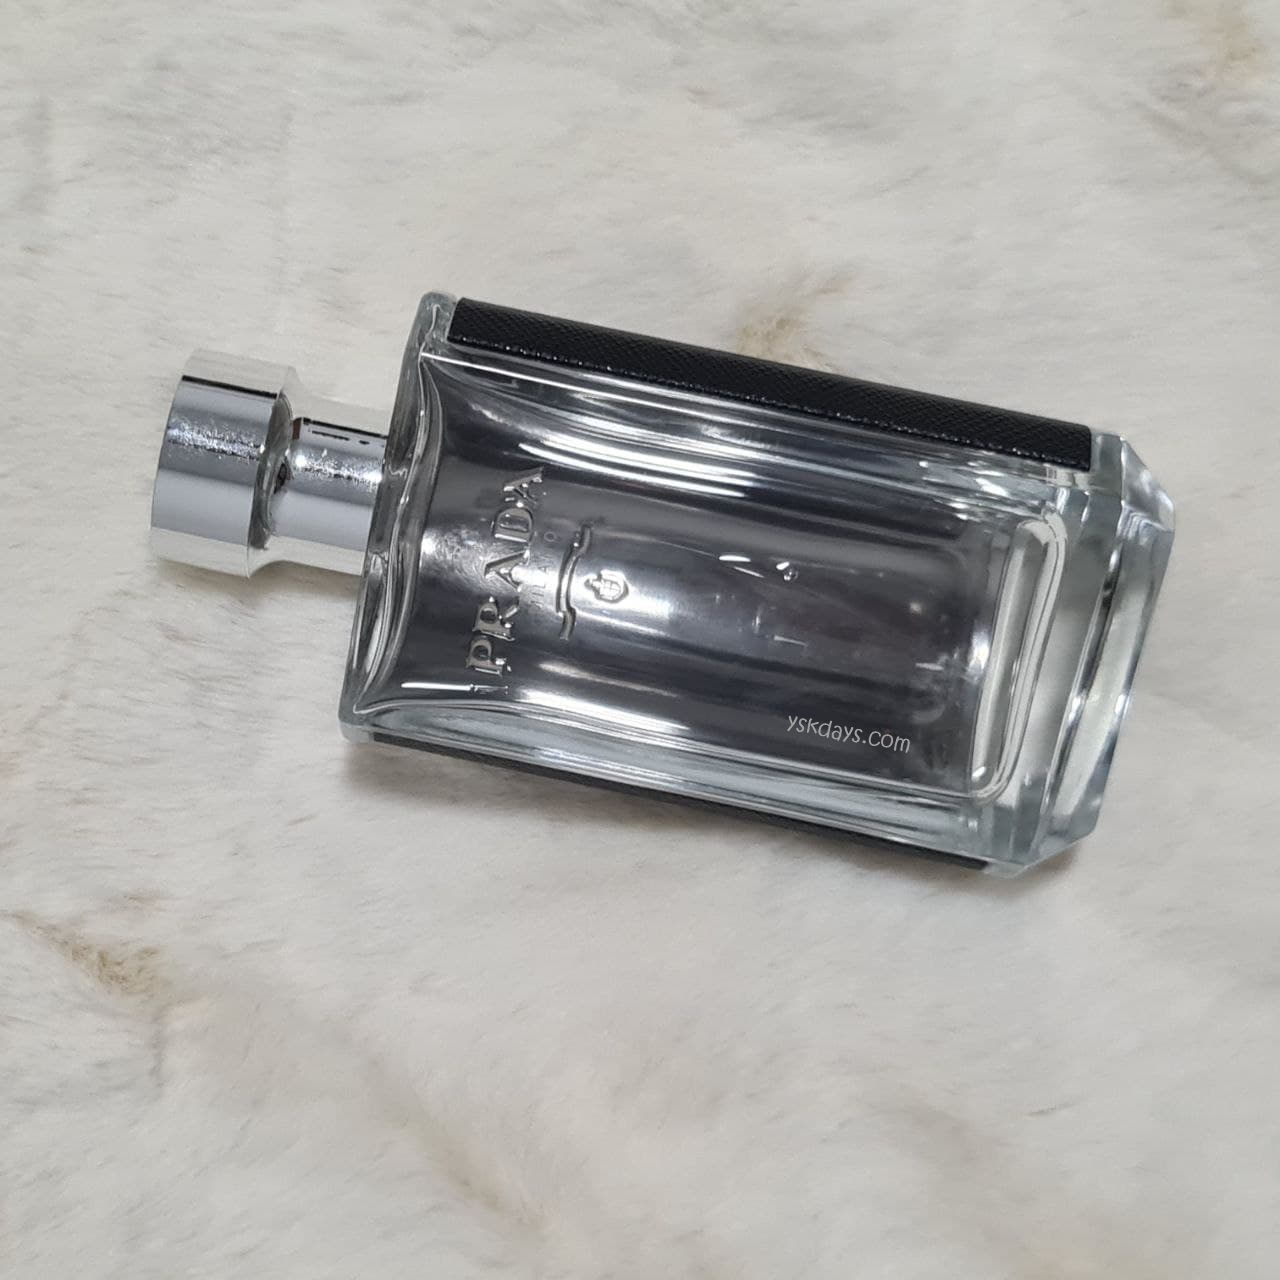 Prada L'Homme Review - The Professional Office Scent - YSK